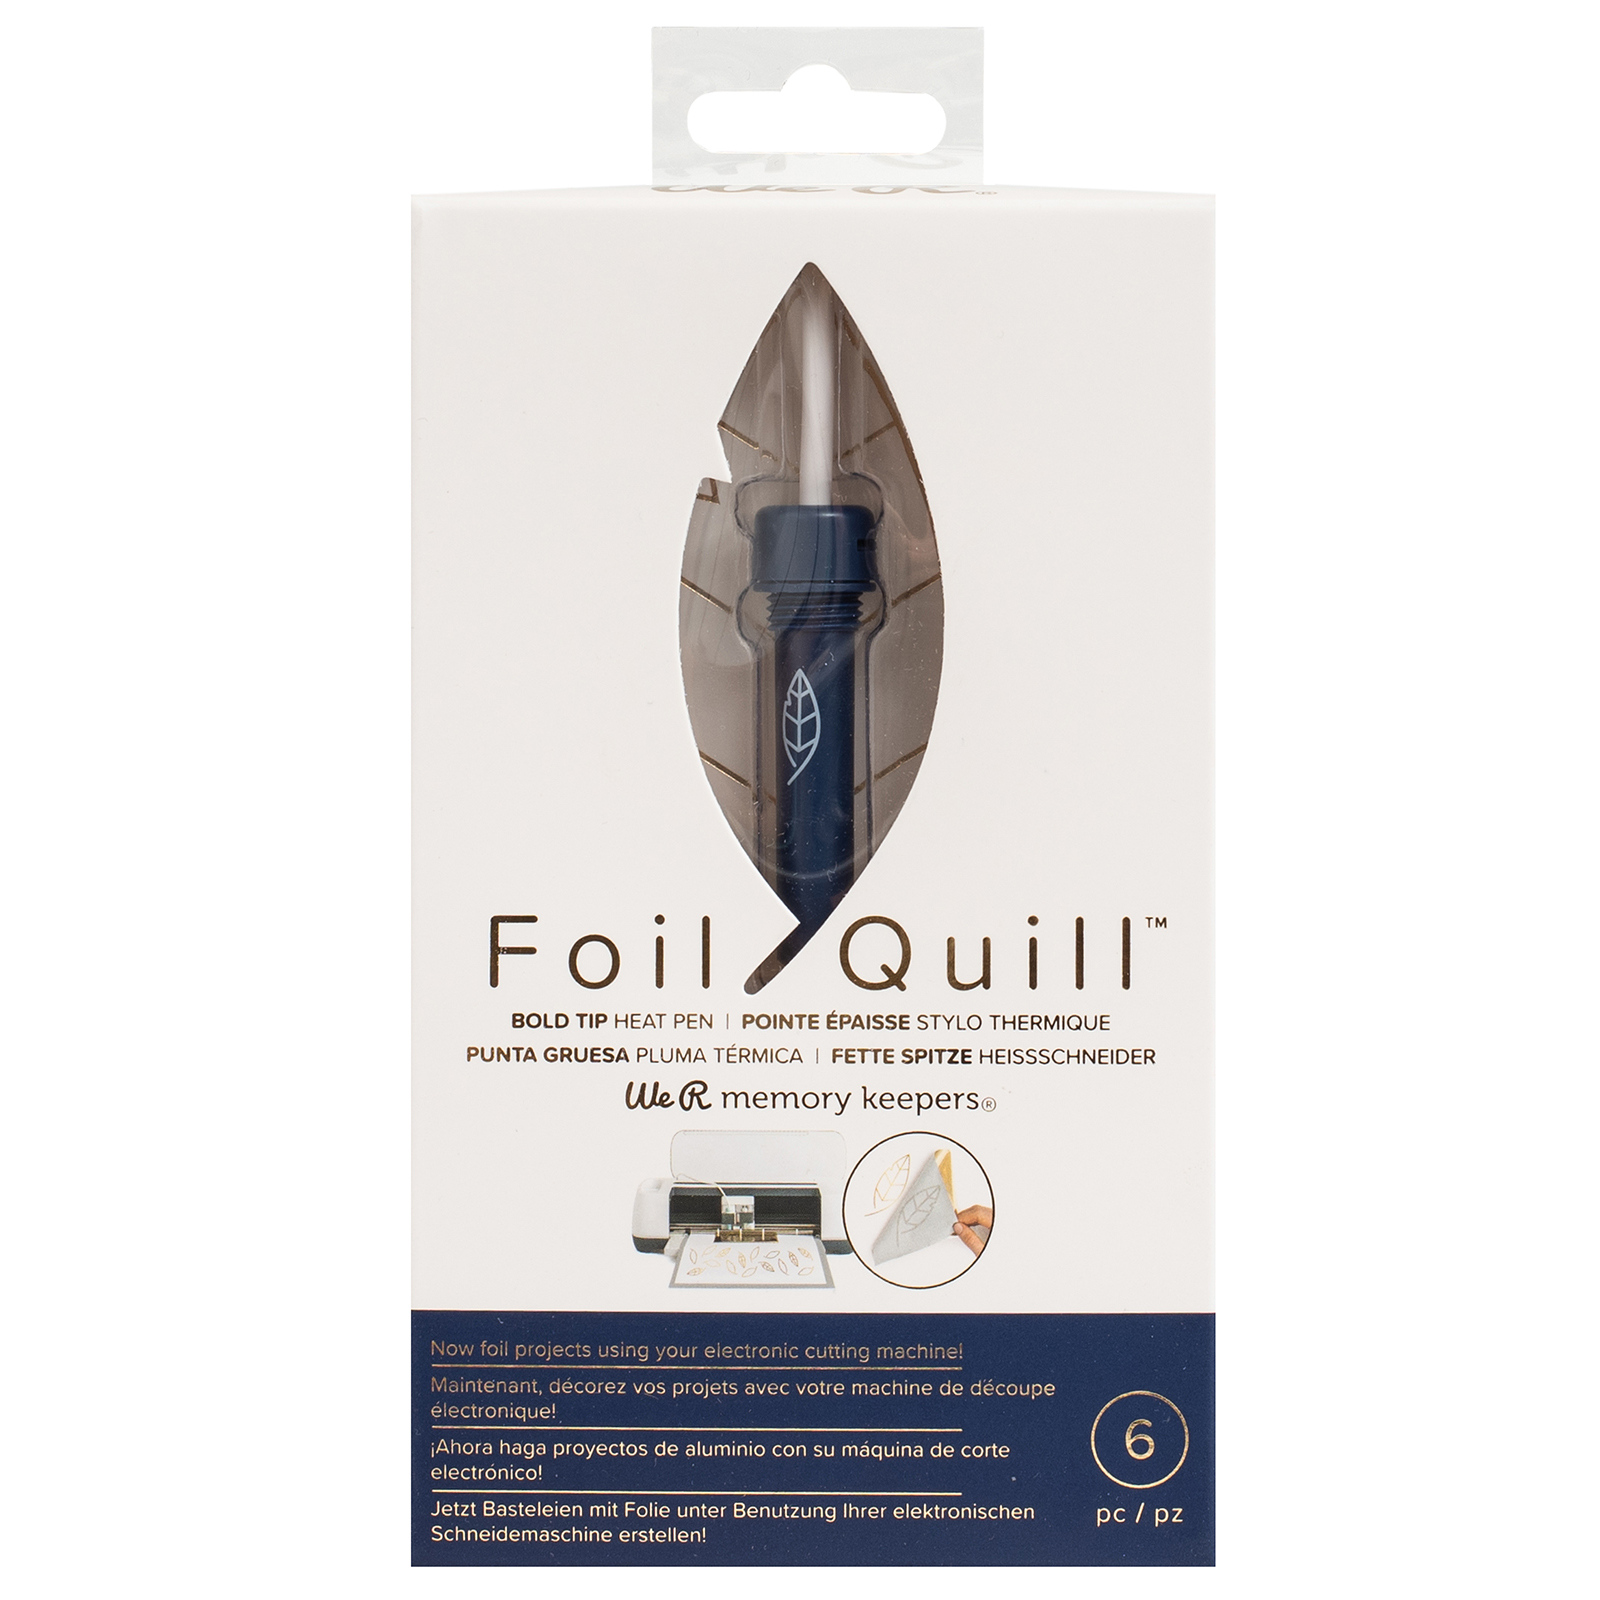 Bold Tip - Foil Quill